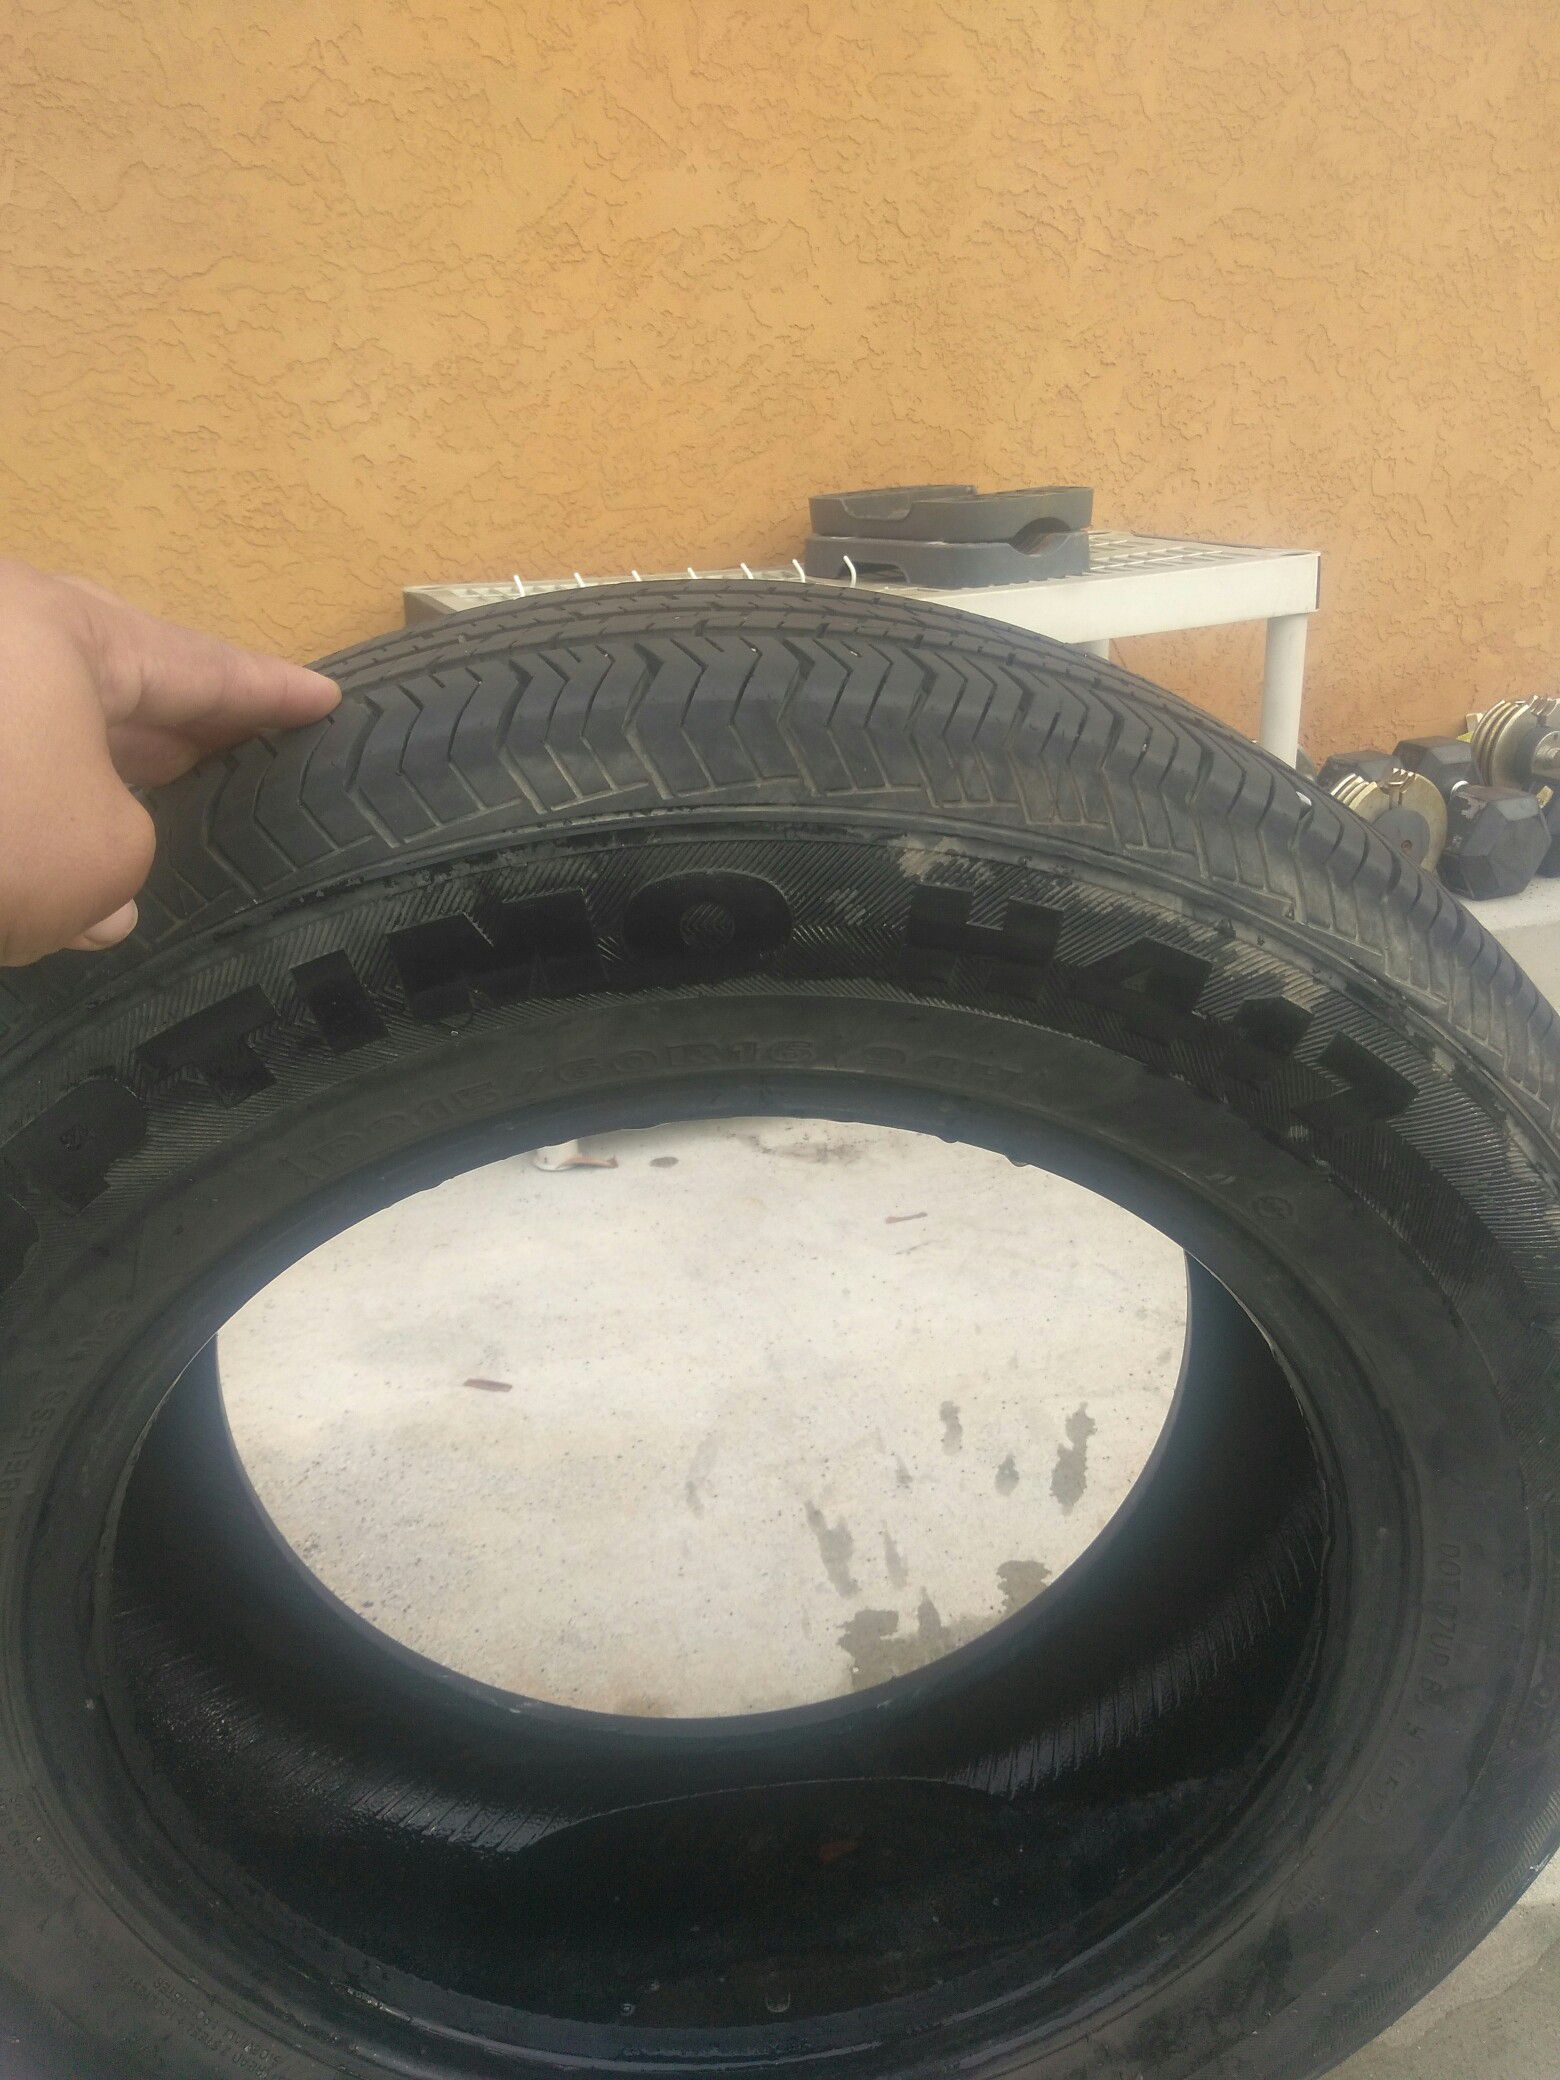 4 Used tires 215/60r16